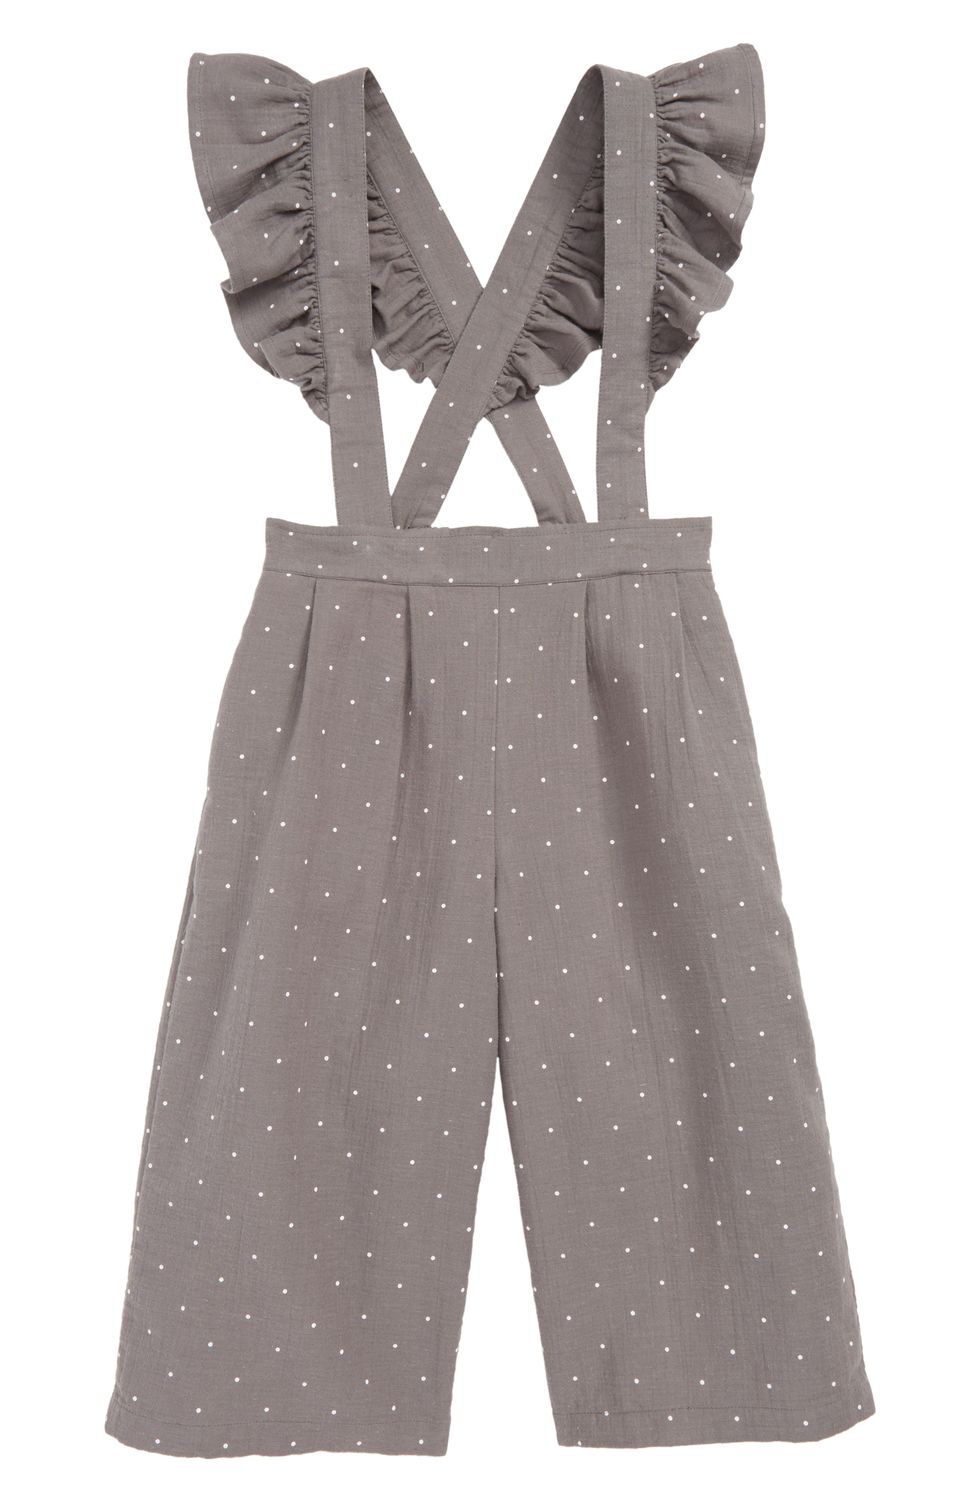 Ruffle Strap Pants in Toddler, Little Girl, and Big Girl Sizes